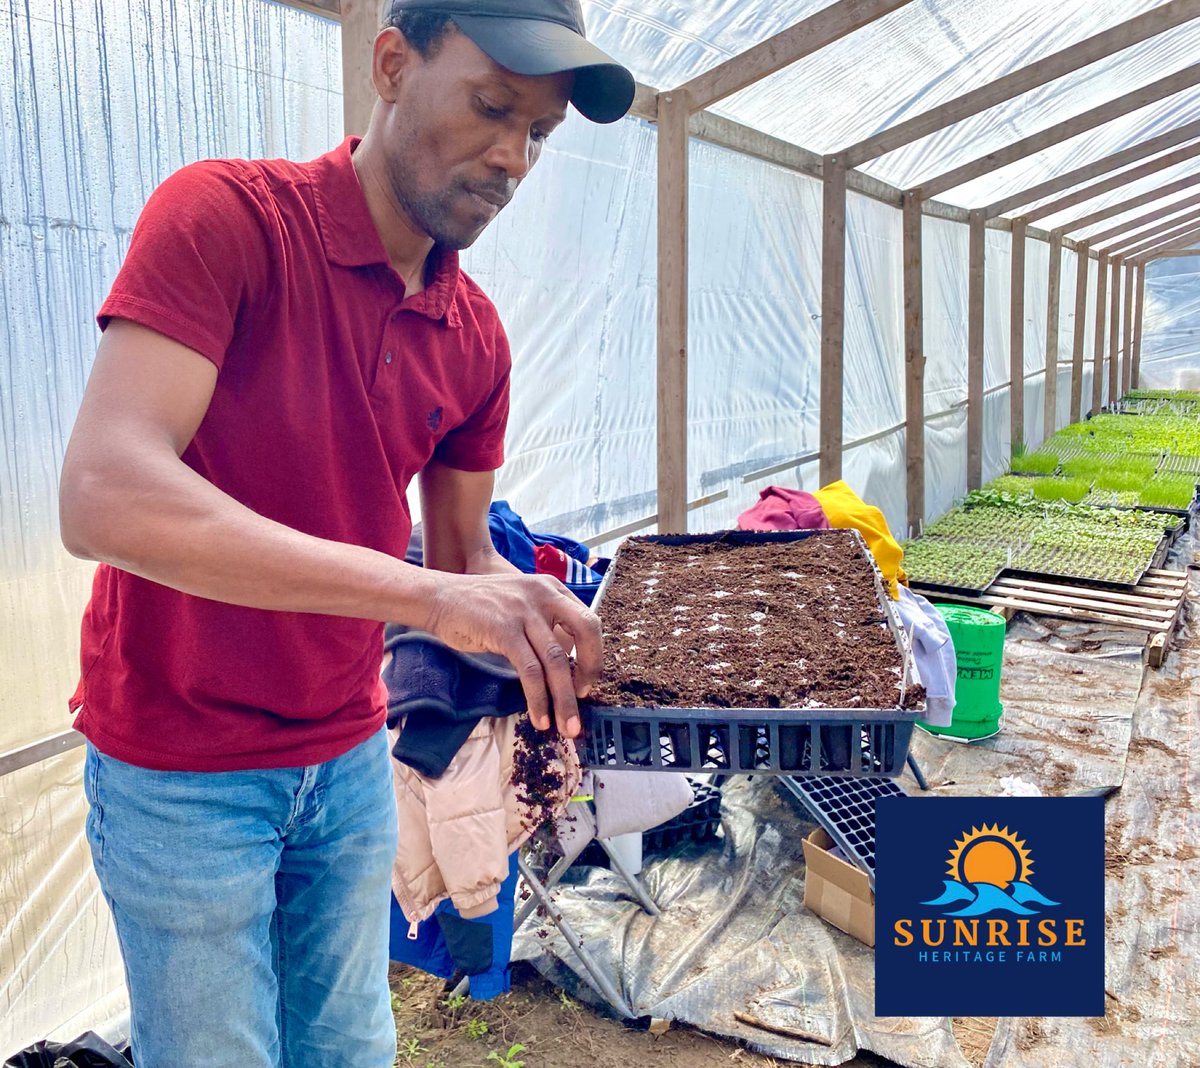 A little cold, but we’re getting started in the greenhouse, and ready for the growing season here in Minnesota. #SunriseHeritageFarm #EmergingFarmers @MNagriculture